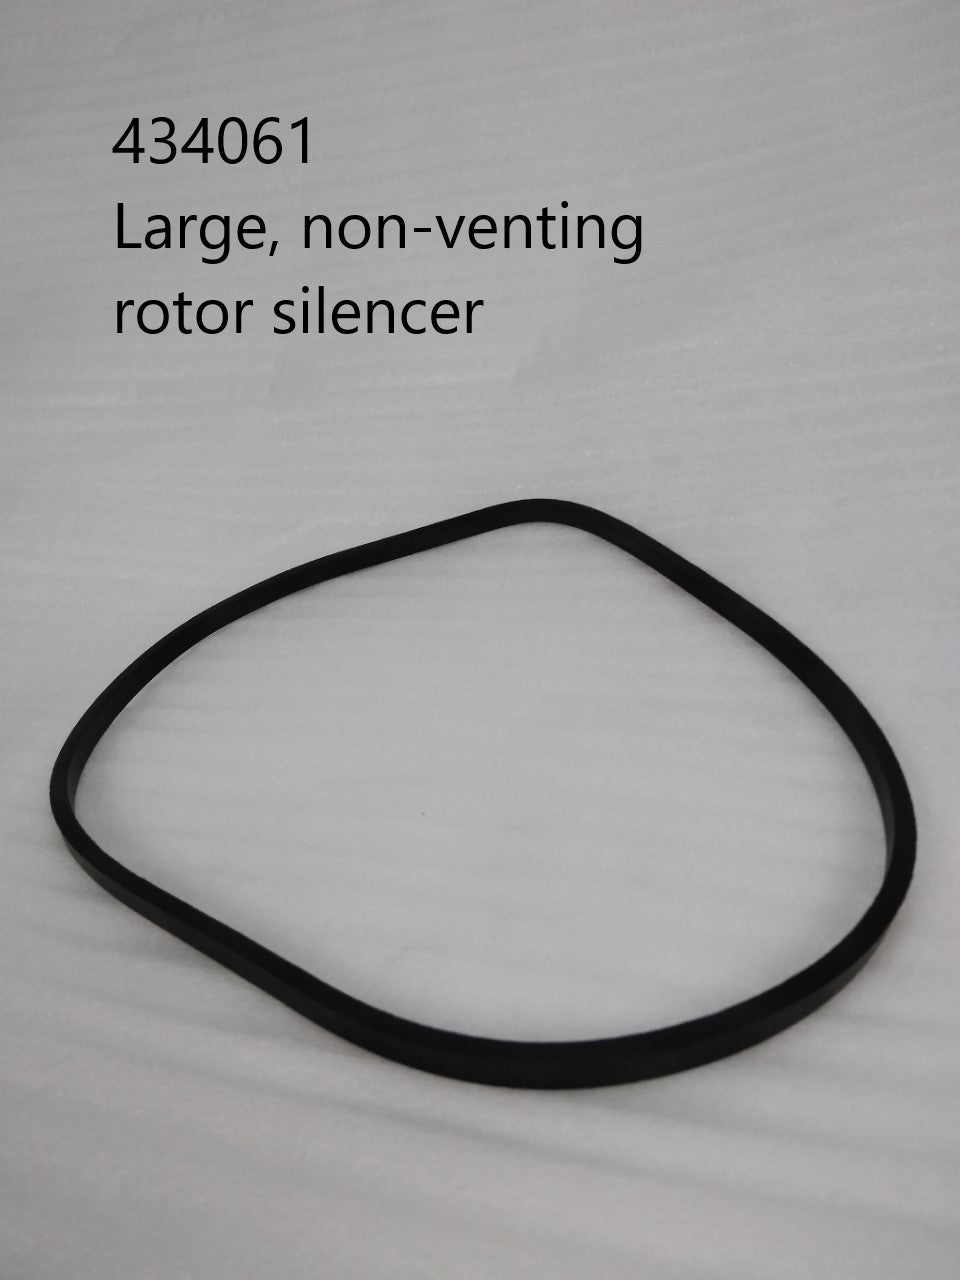 Silencer - Non-Vented Rotor - Large